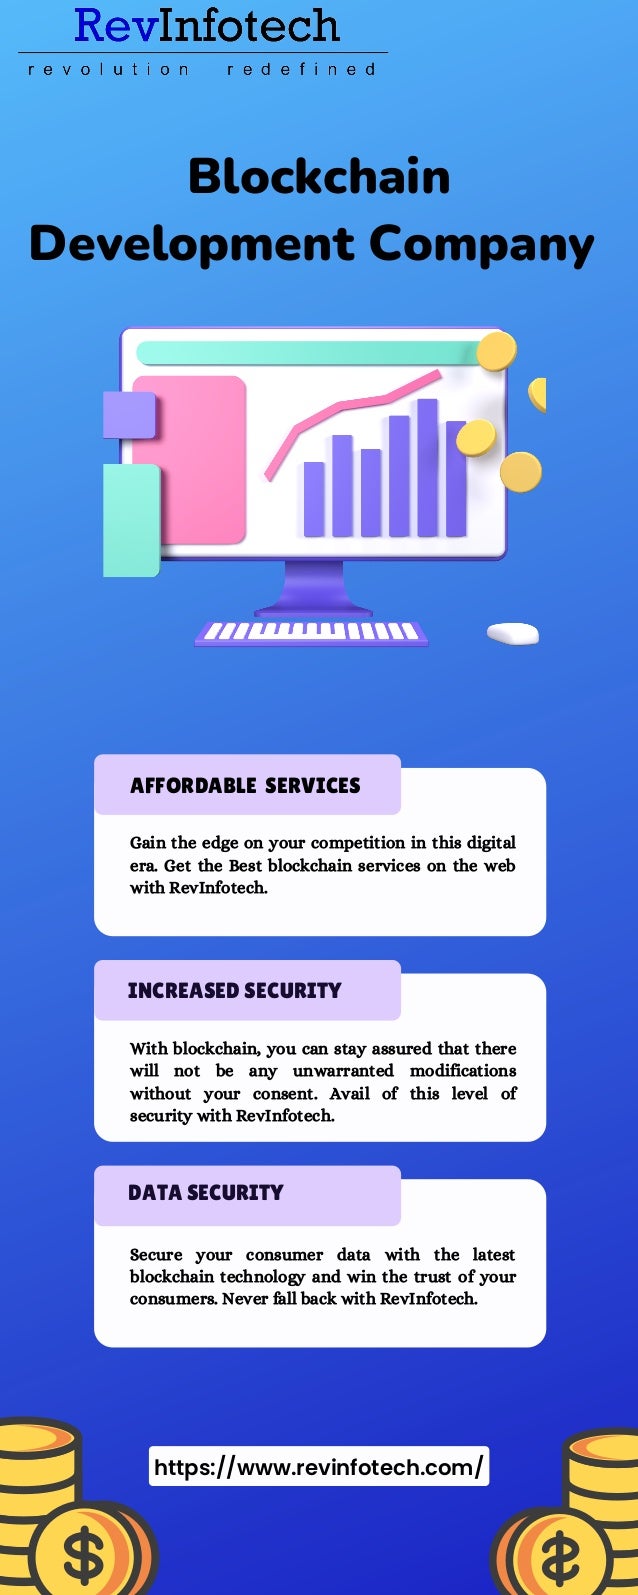 Blockchain
Development Company
Gain the edge on your competition in this digital
era. Get the Best blockchain services on the web
with RevInfotech.
INCREASED SECURITY
With blockchain, you can stay assured that there
will not be any unwarranted modifications
without your consent. Avail of this level of
security with RevInfotech.
DATA SECURITY
Secure your consumer data with the latest
blockchain technology and win the trust of your
consumers. Never fall back with RevInfotech.
AFFORDABLE SERVICES
https://www.revinfotech.com/
 